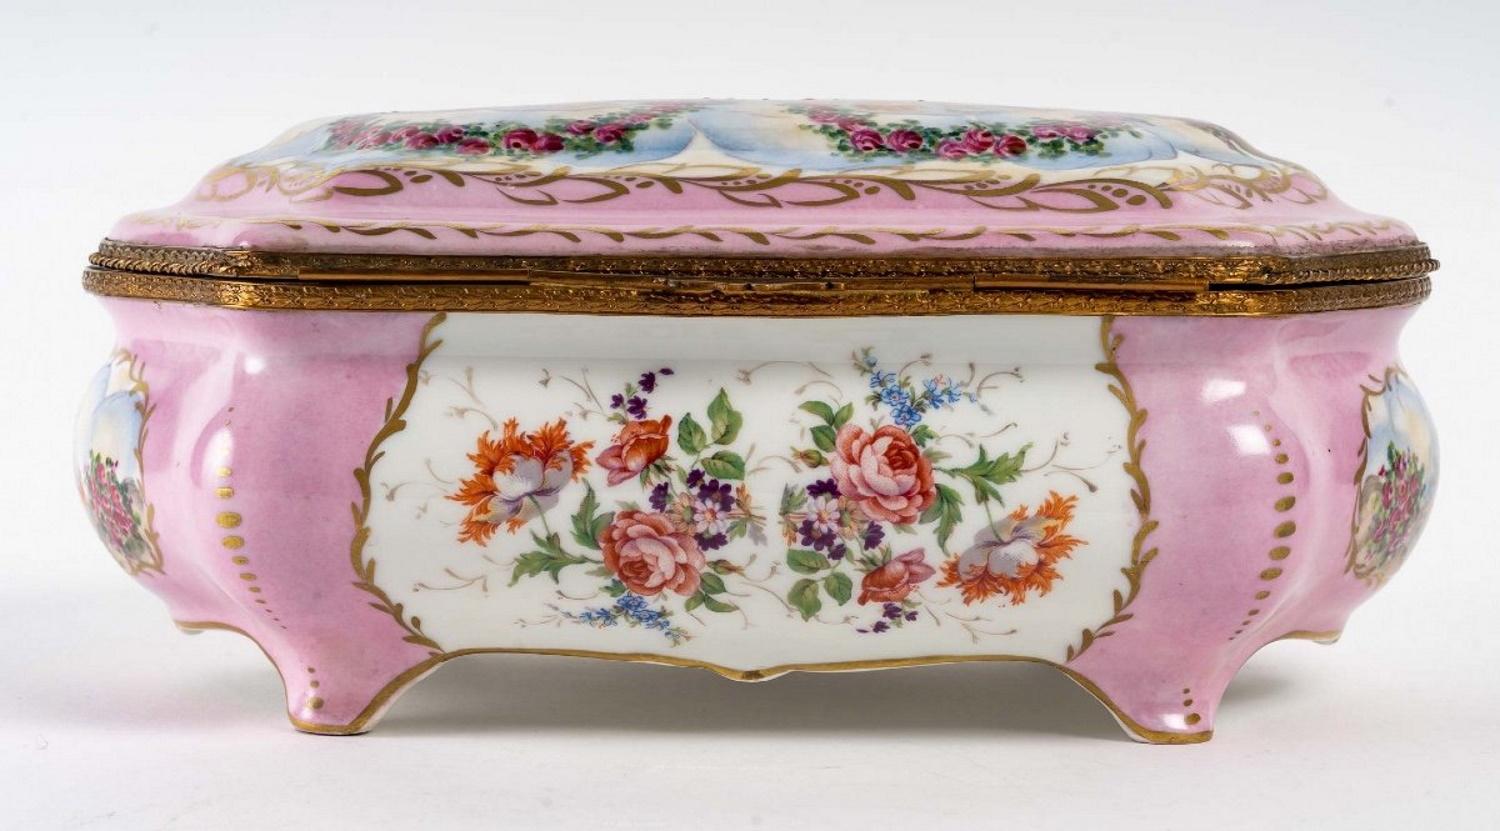 Beautiful pink and white porcelain jewellery box in the Sèvres style.
With paintings in cartouches, gilt bronze trim.
In perfect condition.
Measures: H: 15 cm, W: 35 cm, D: 28 cm.